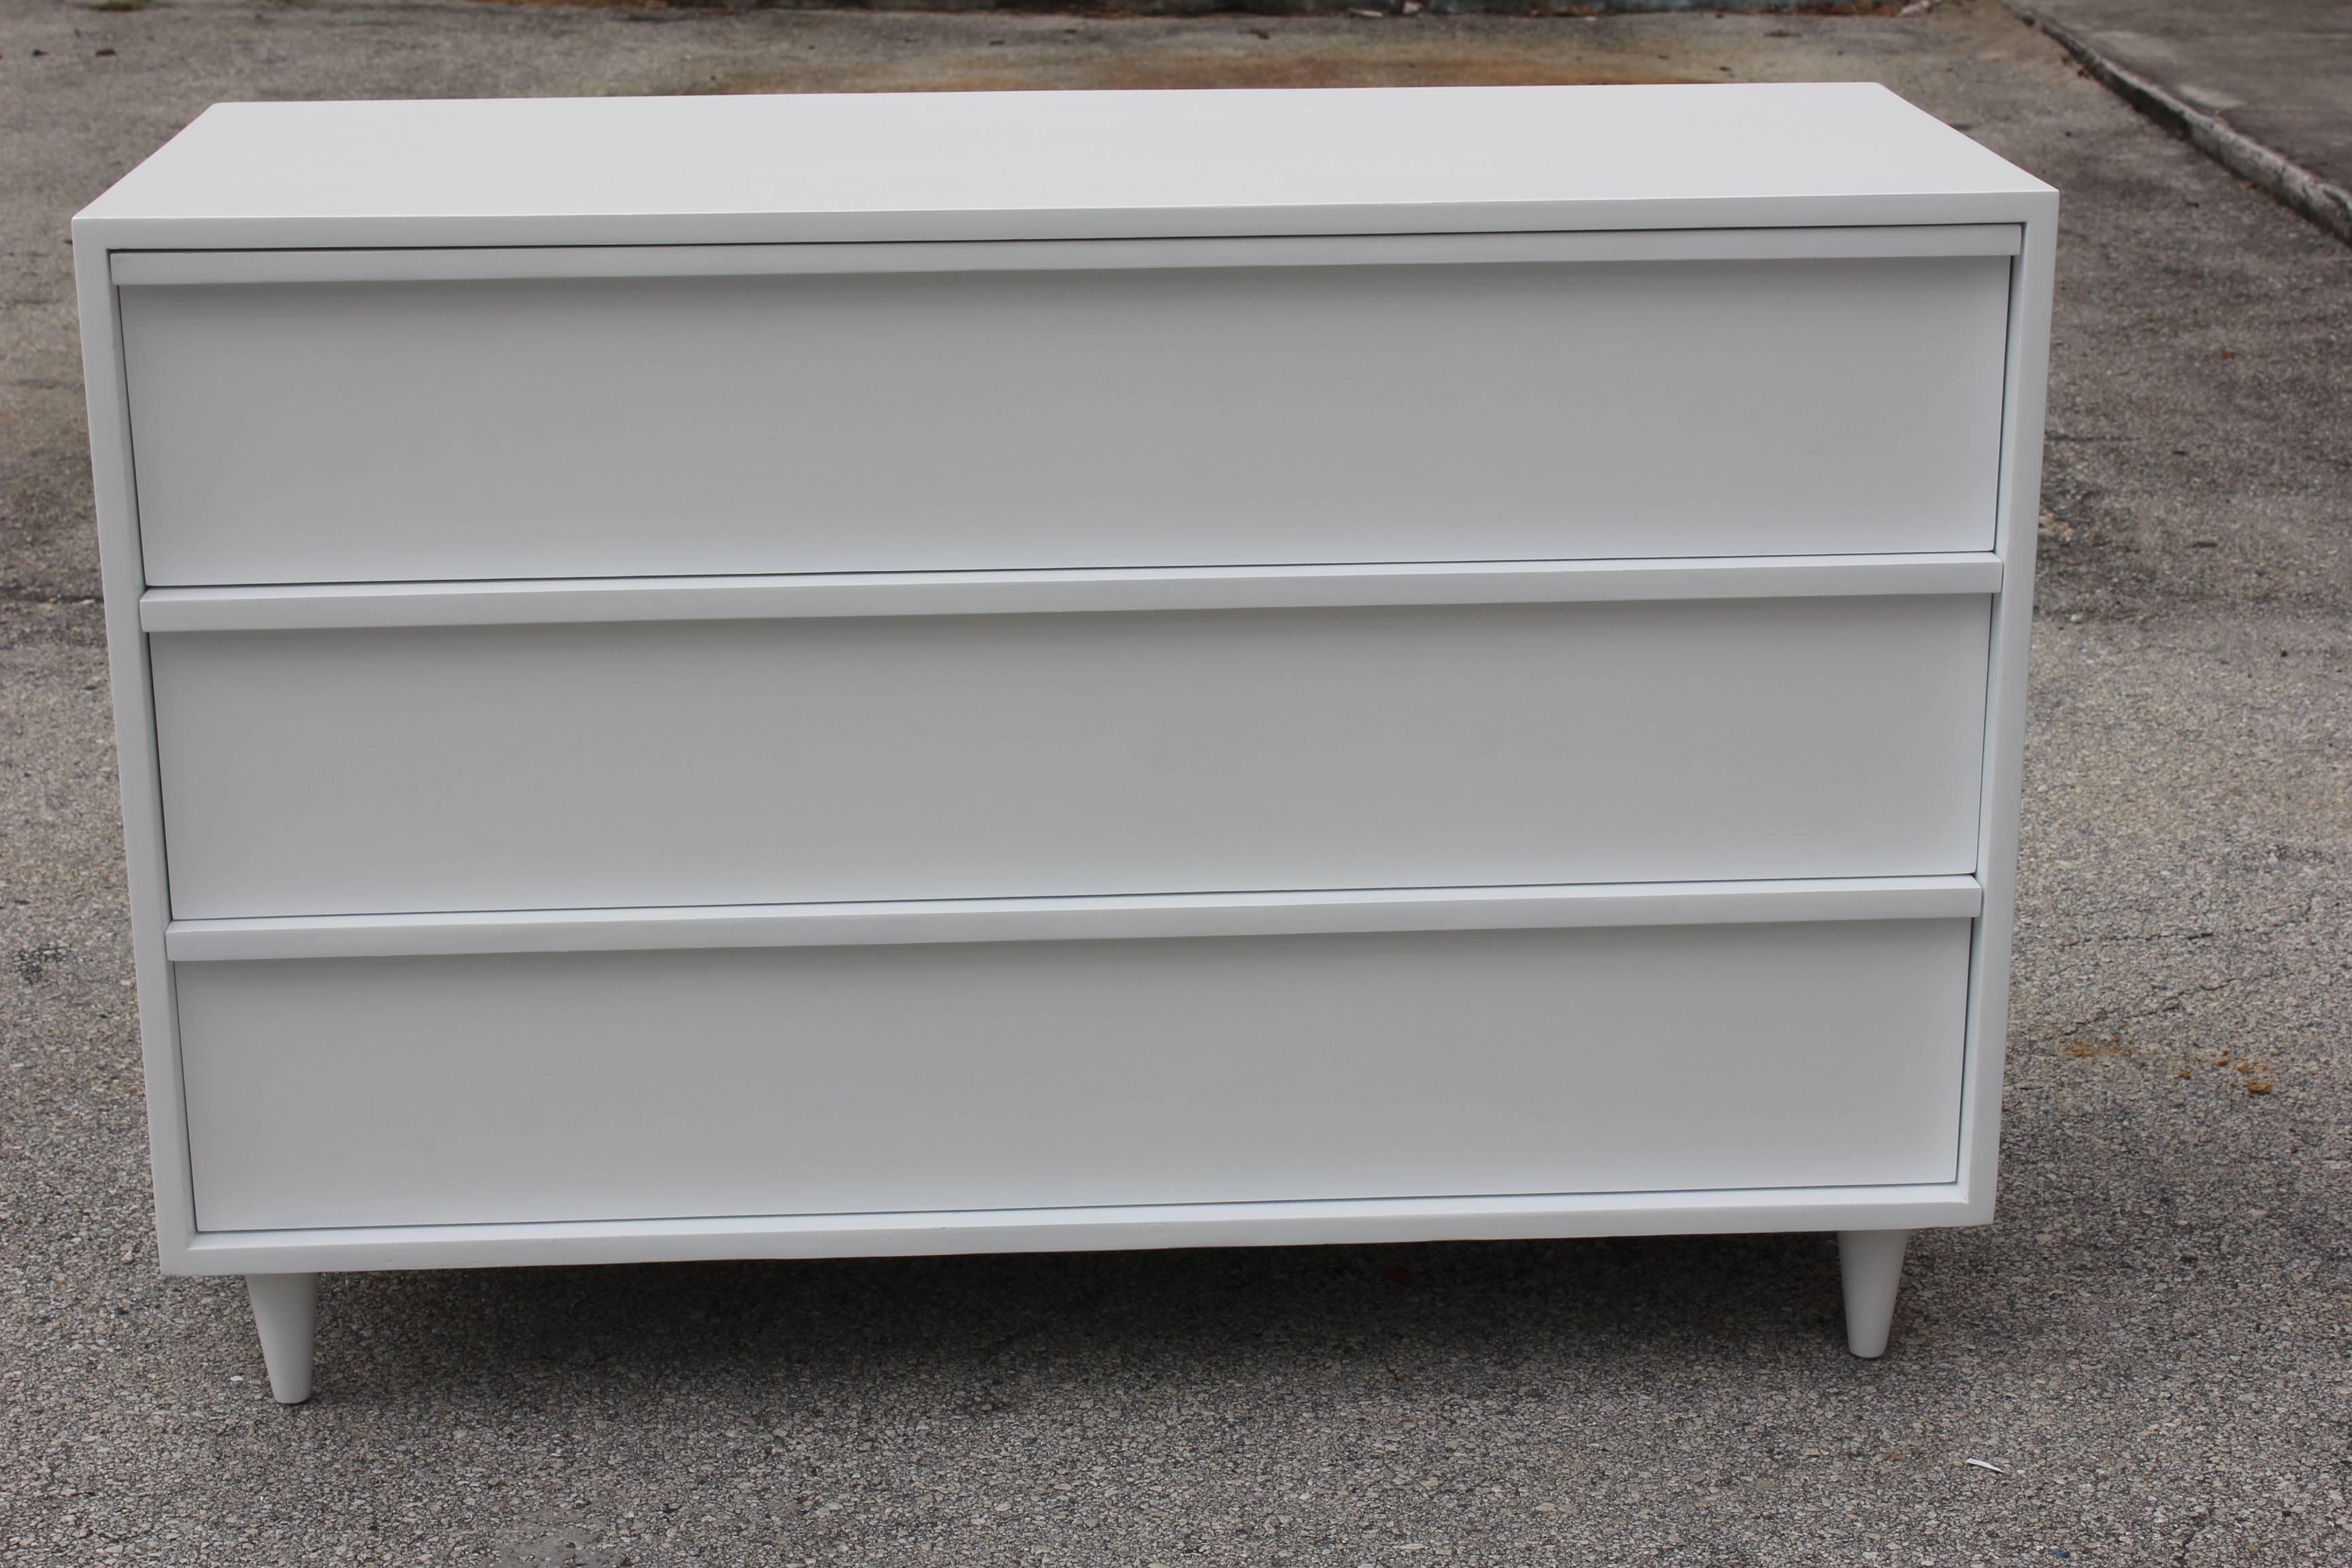 A French Mid-Century Modern snow white lacquered three-drawer dresser, circa 1950s. Newly lacquered in brilliant white.